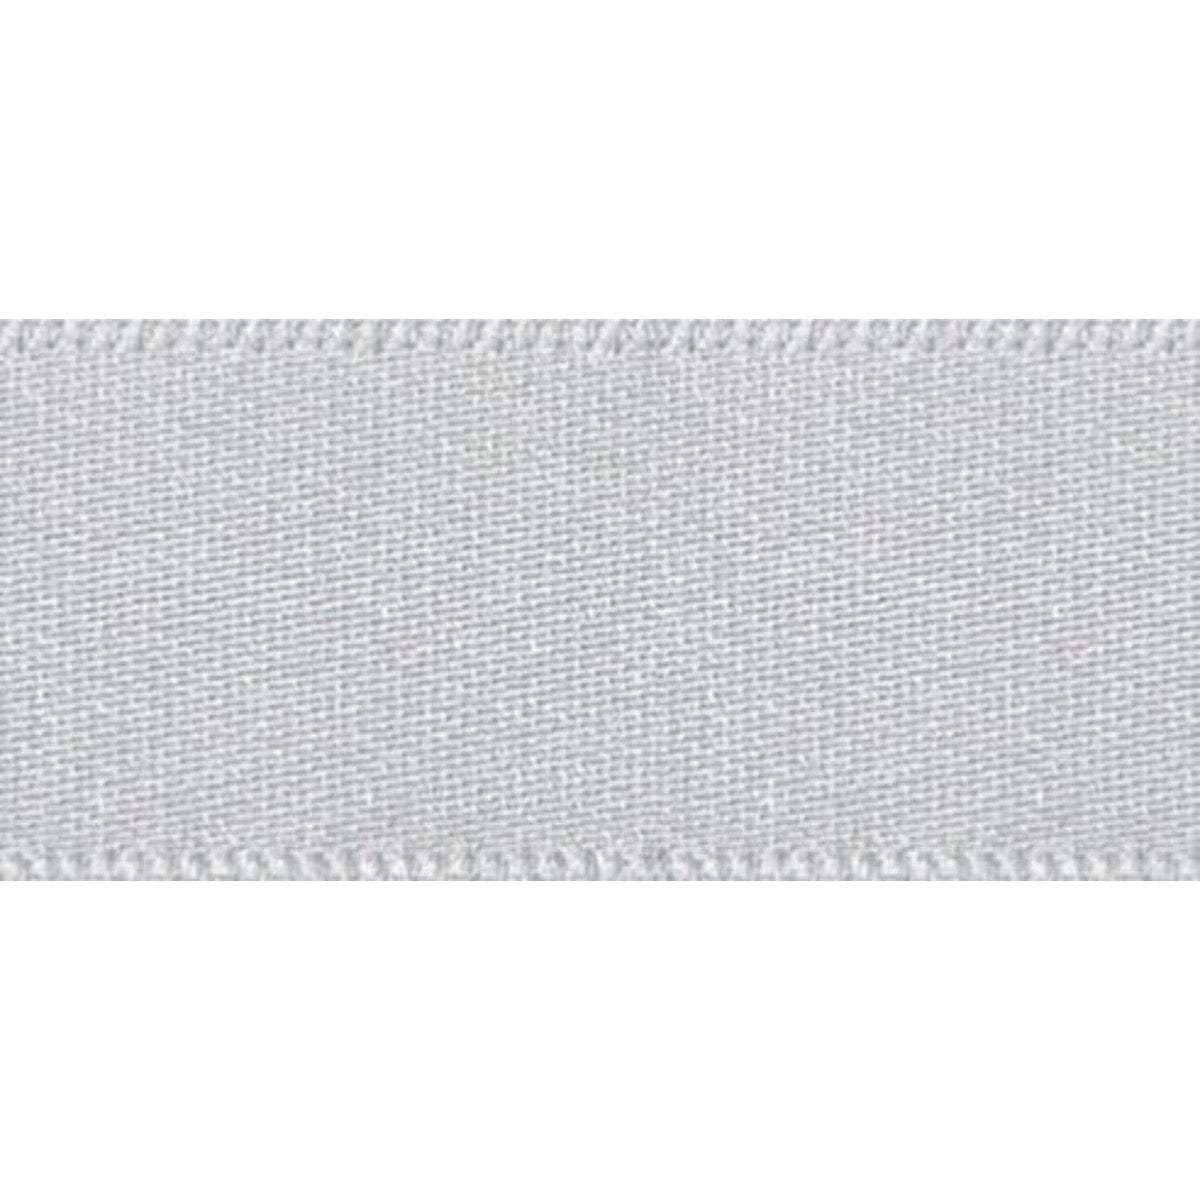 Double Faced Satin Ribbon Silver Grey: 15mm Wide. Price per metre.